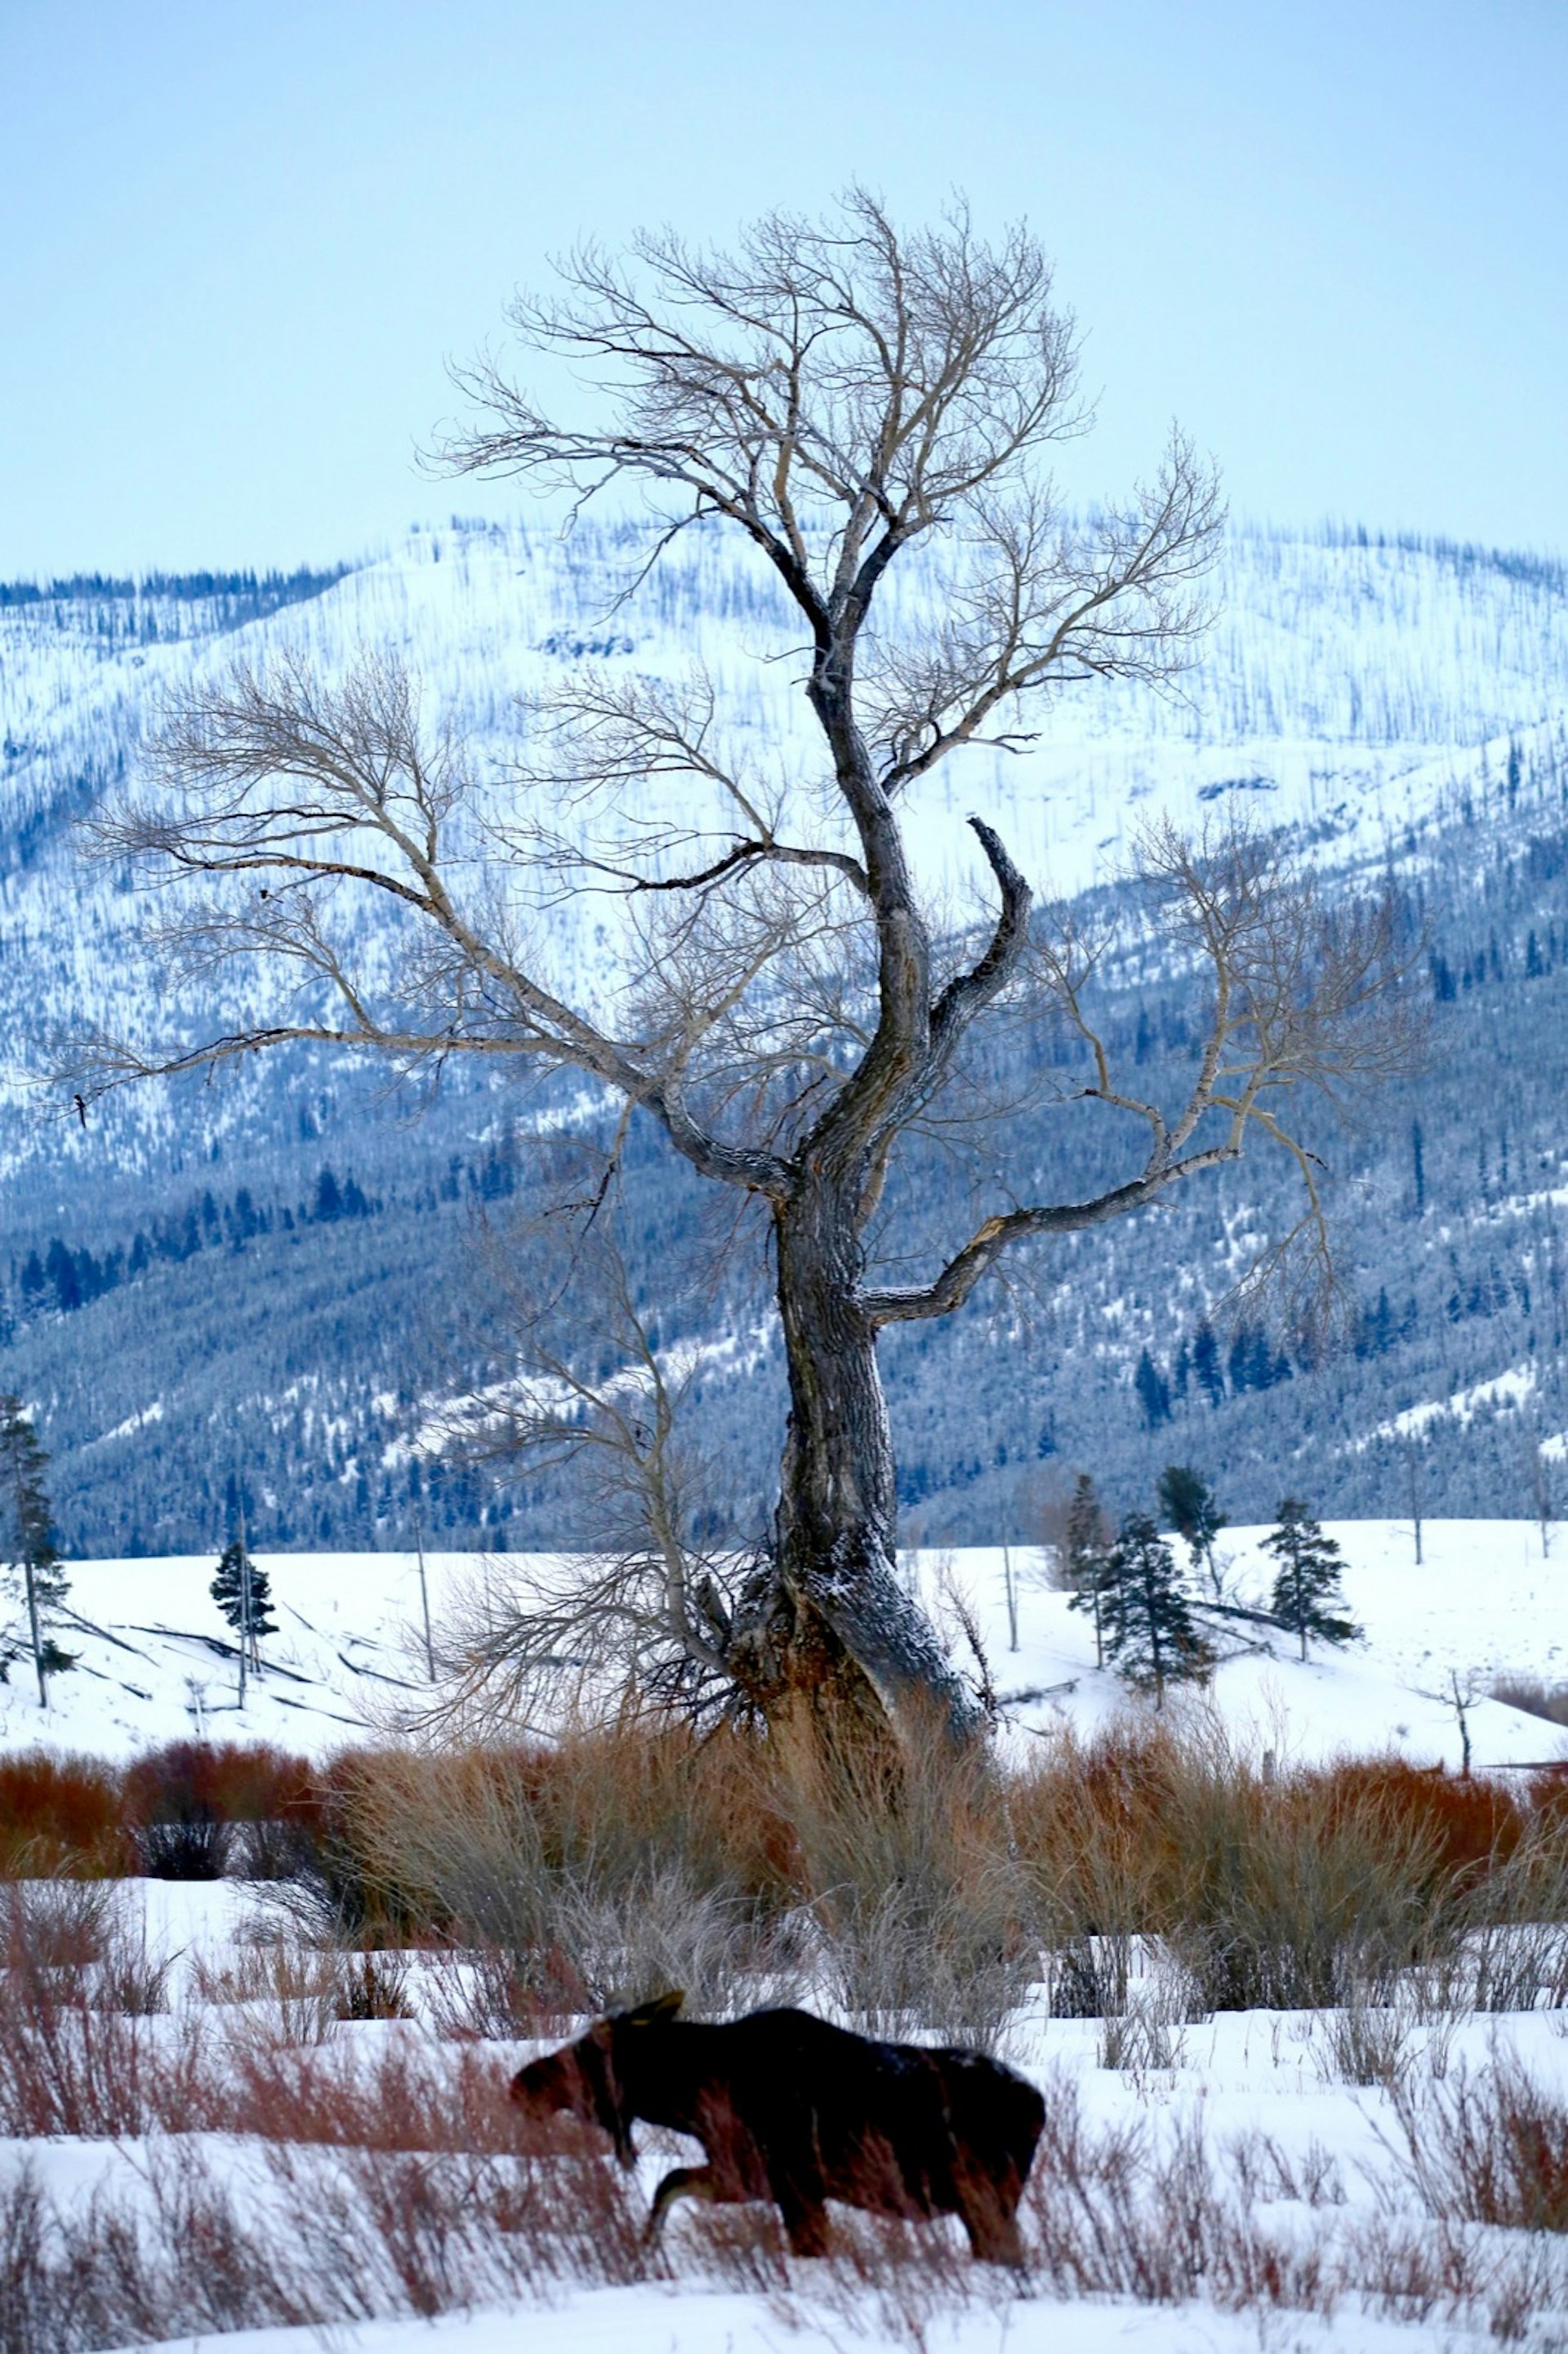 A moose bounds out of deep snow under a tree with snow-covered mountains in the background; Yellowstone winter wildlife